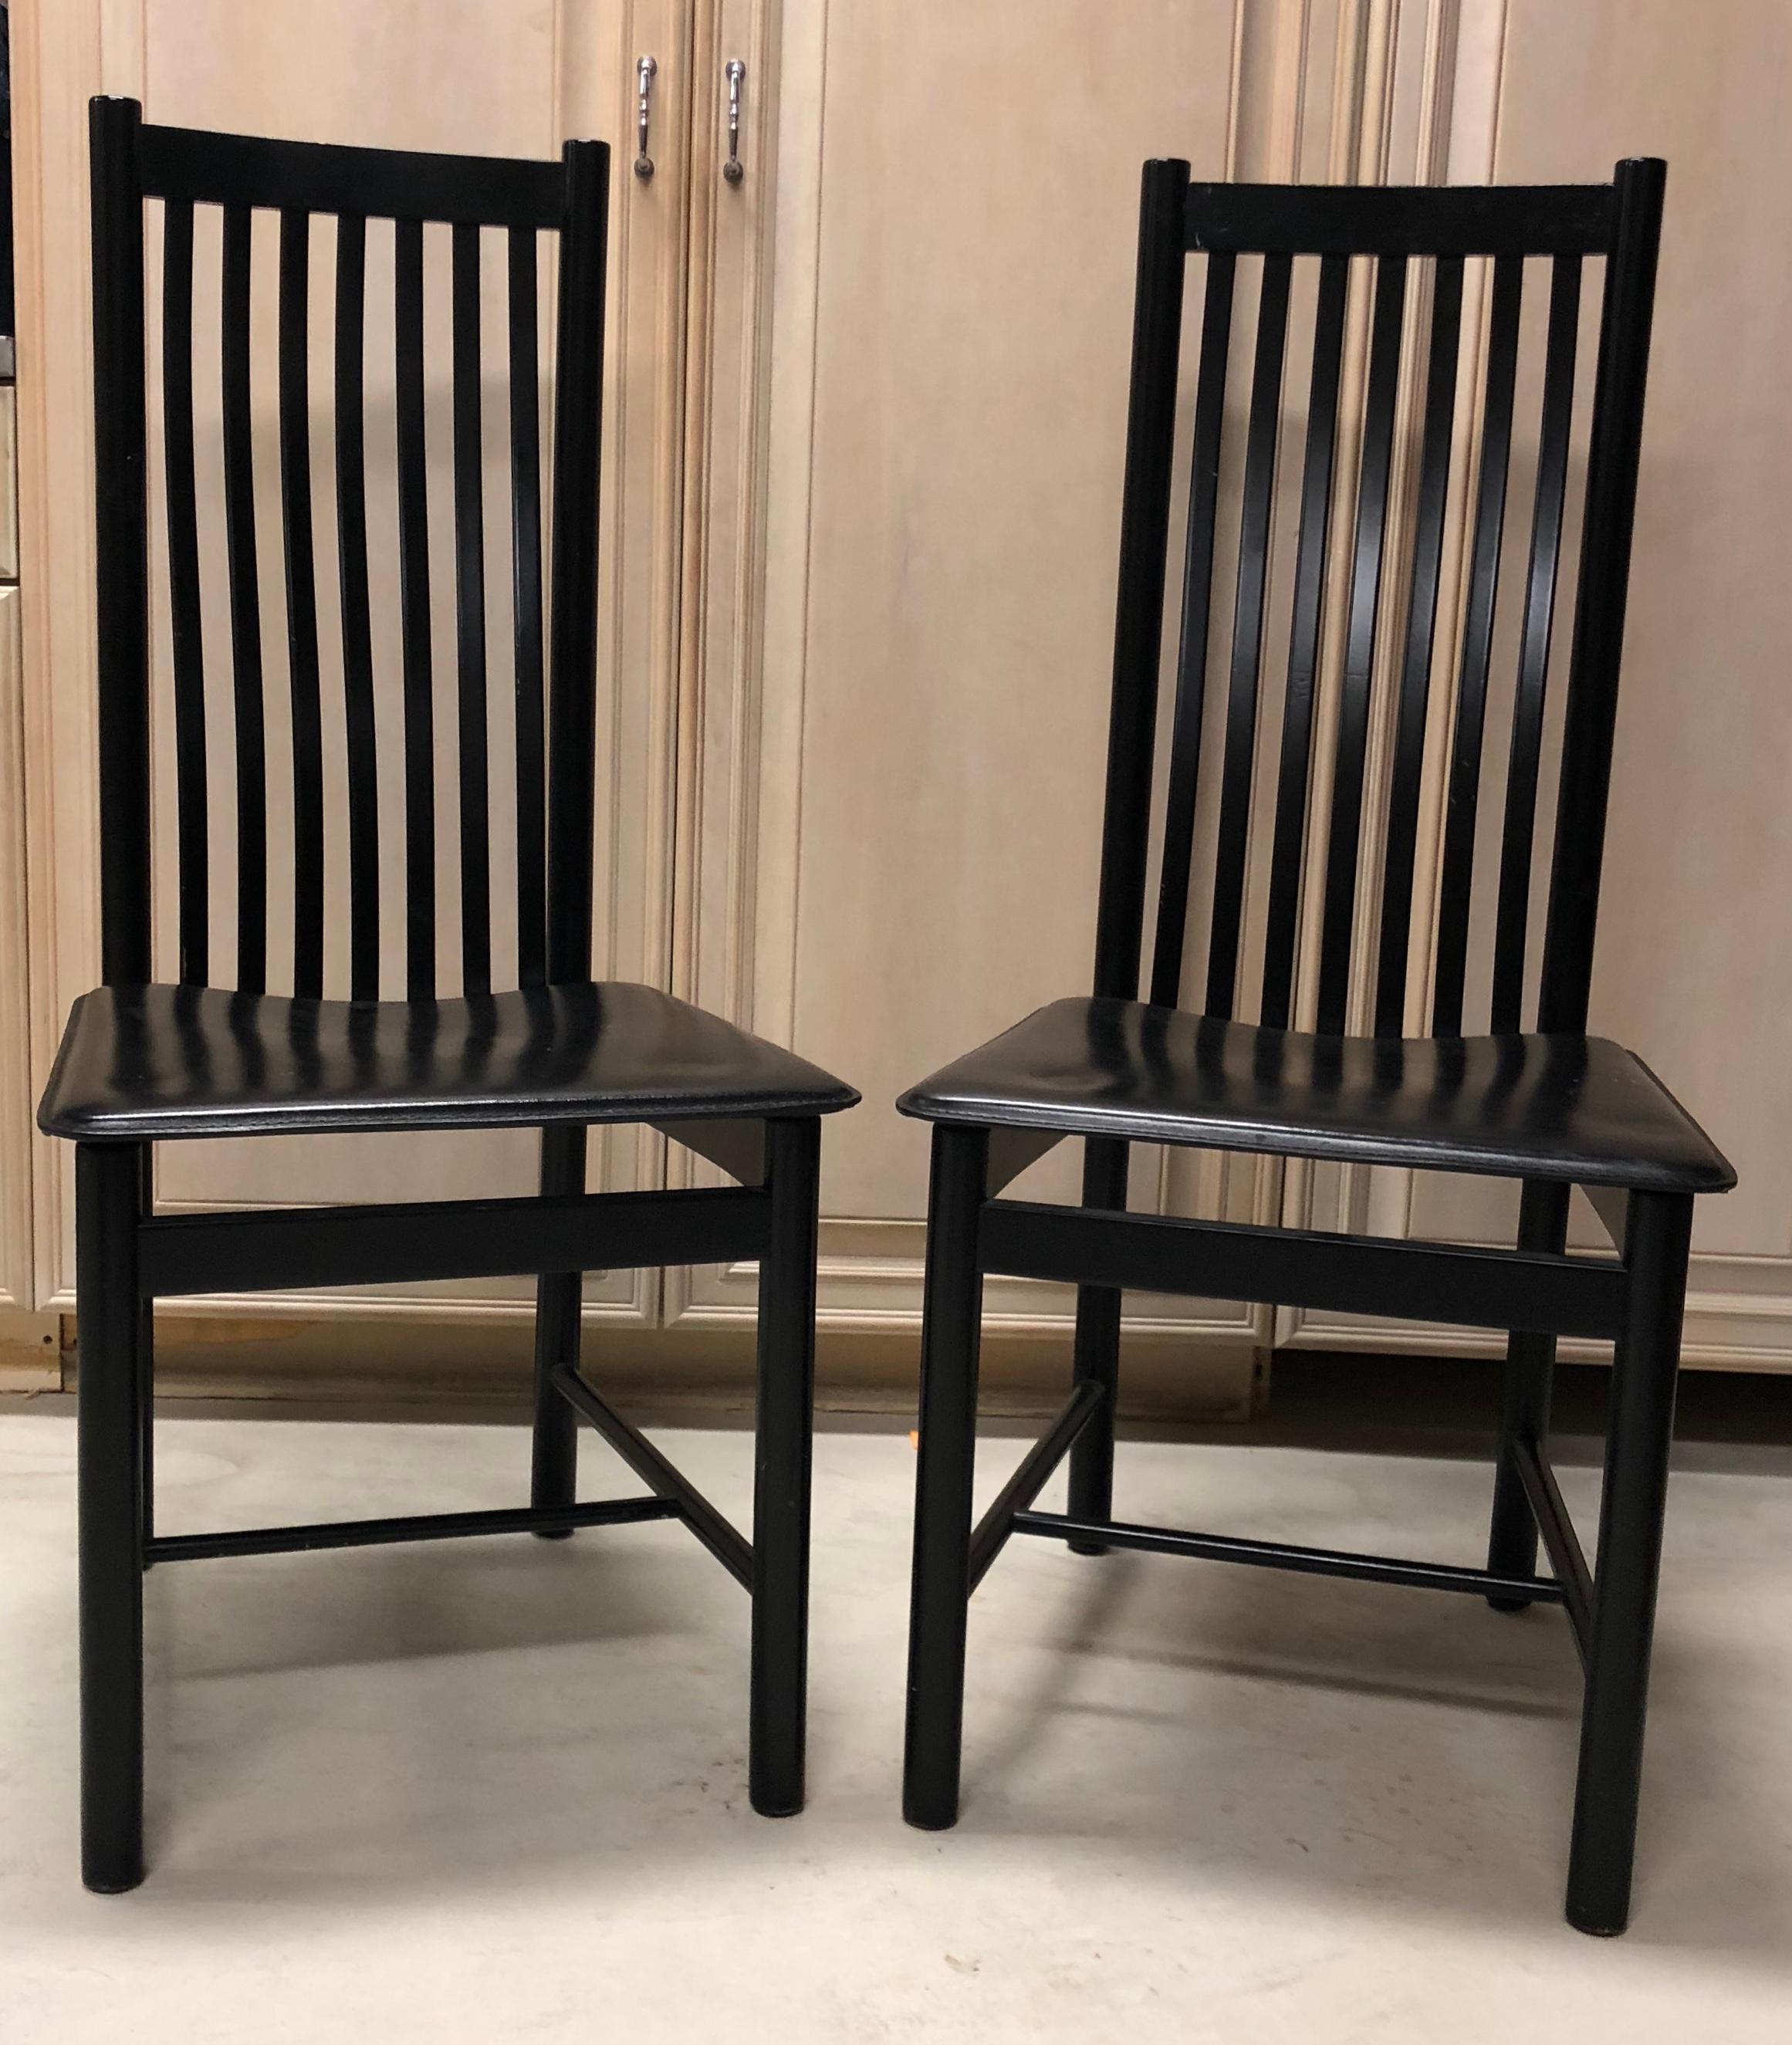 Chic set of 8 dining chairs in black lacquer with padded seat panels. The chairs are in very good condition and quite comfortable.